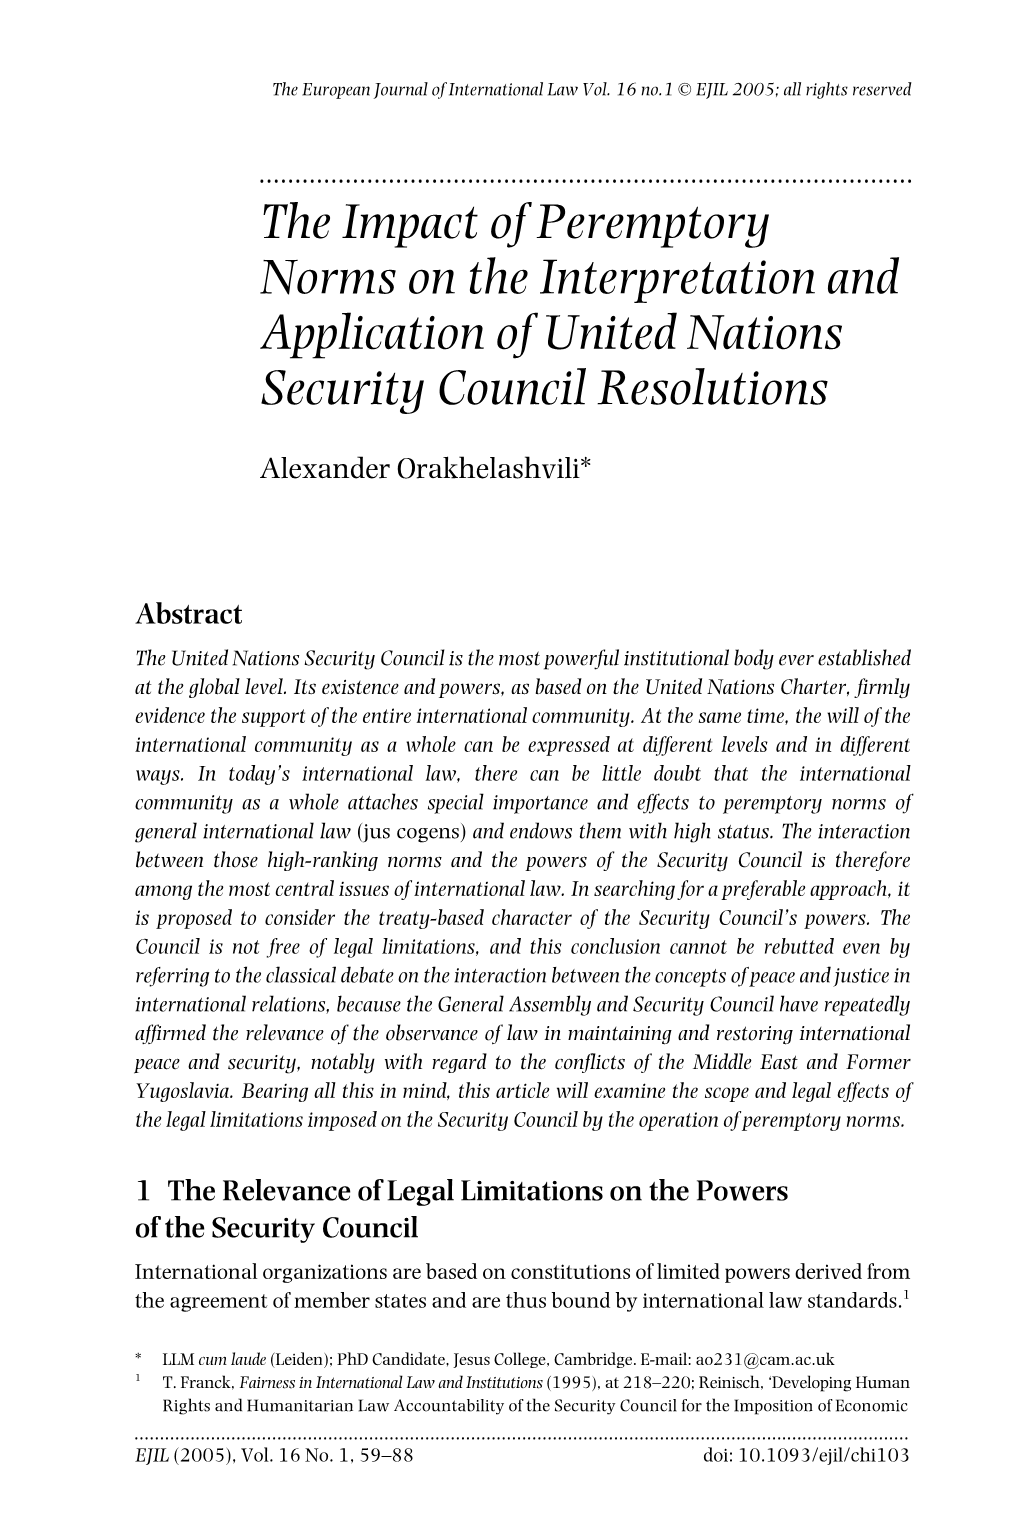 The Impact of Peremptory Norms on the Interpretation and Application of United Nations Security Council Resolutions